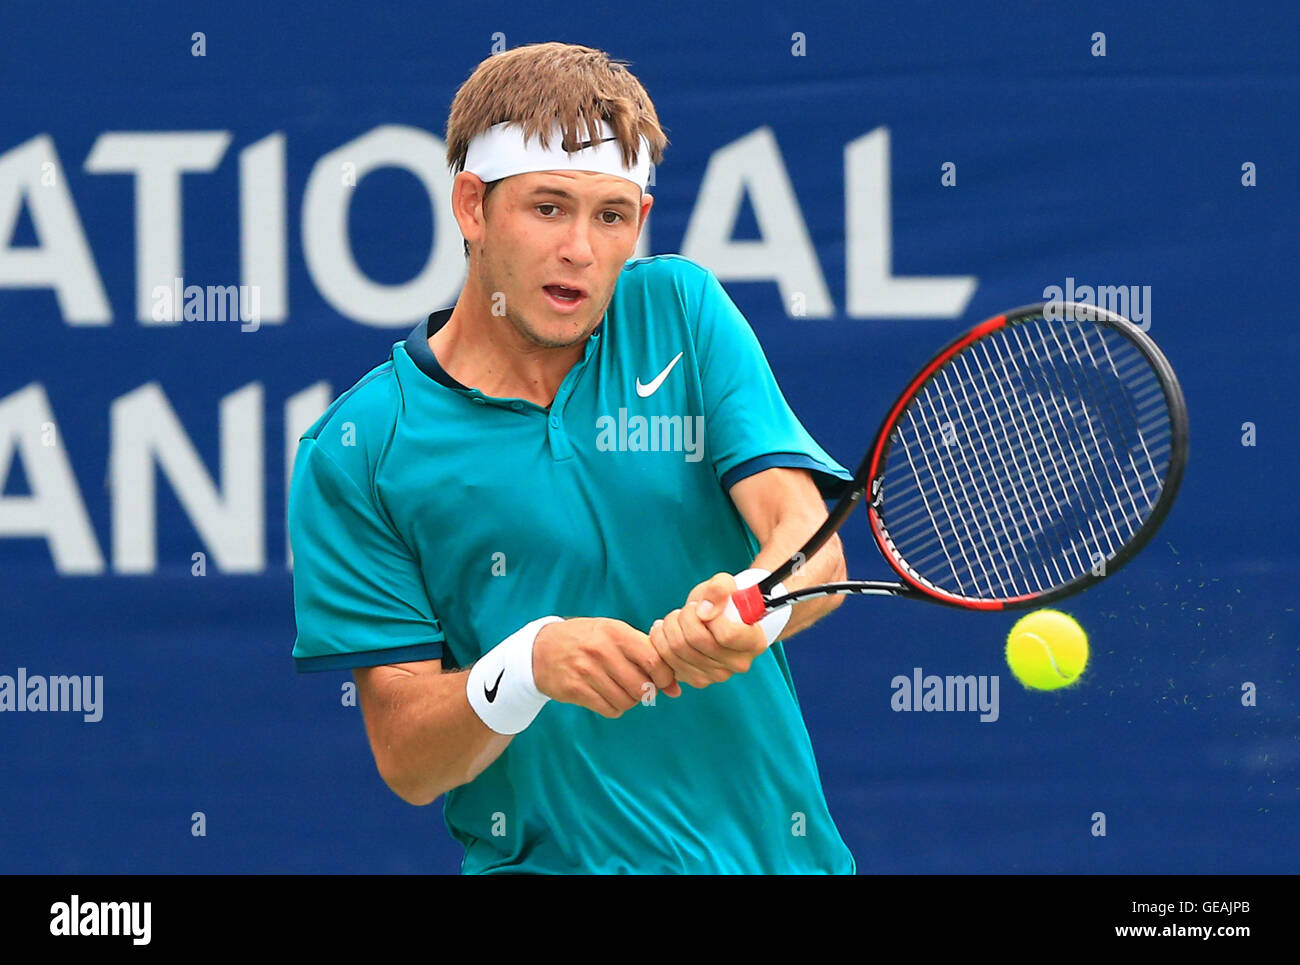 Toronto, Canada. 24th July, 2016. Jared Donaldson of the United States  returns the ball against Amir Weintraub of Israel during the second round  of men's singles qualifying match at the 2016 Rogers